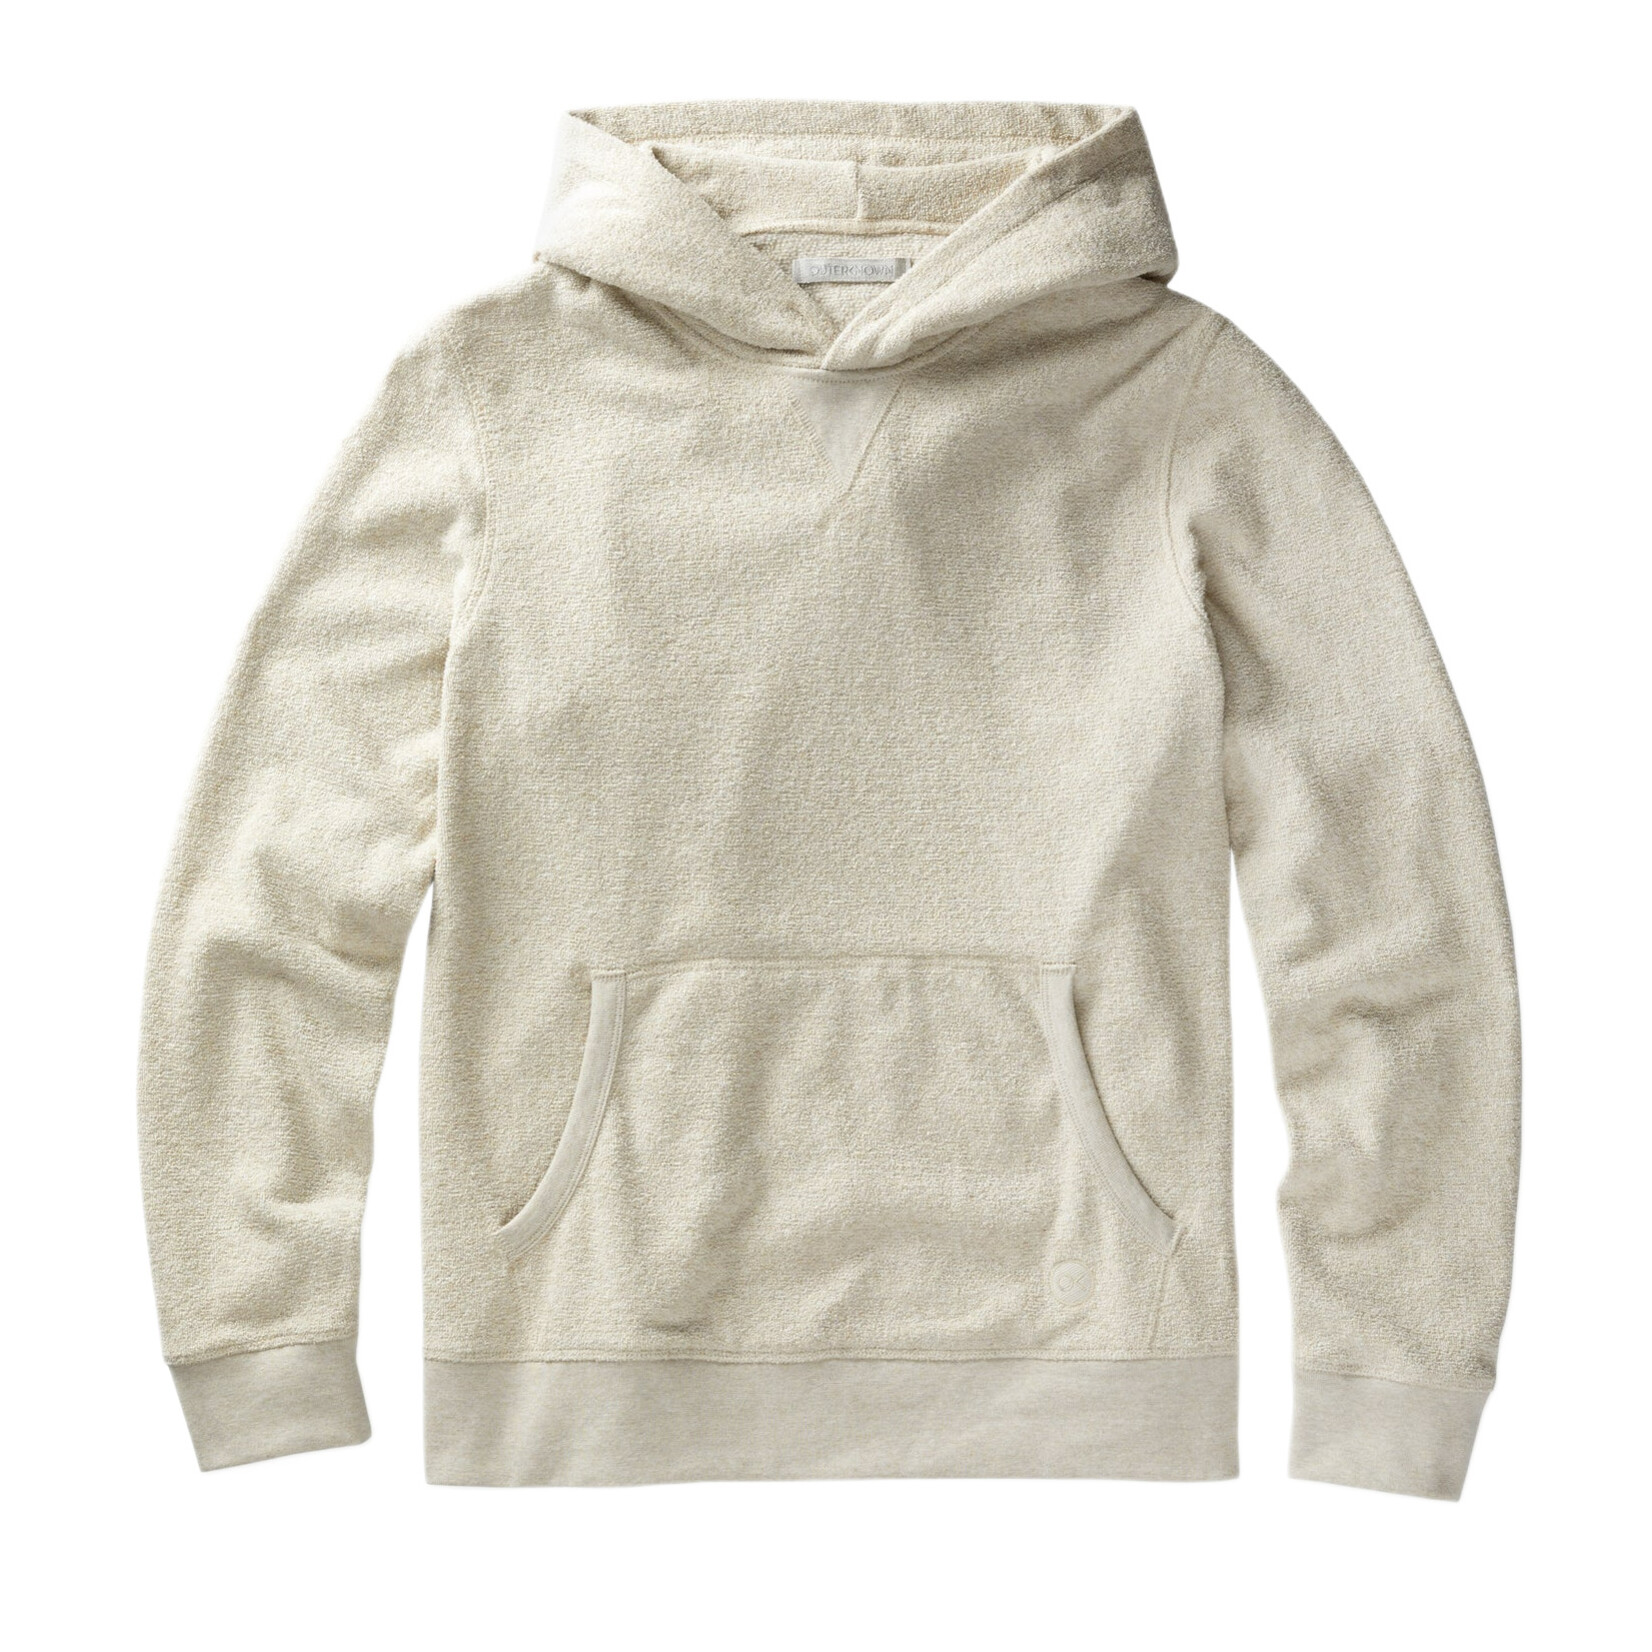 OuterKnown Hightide Pullover Hoodie